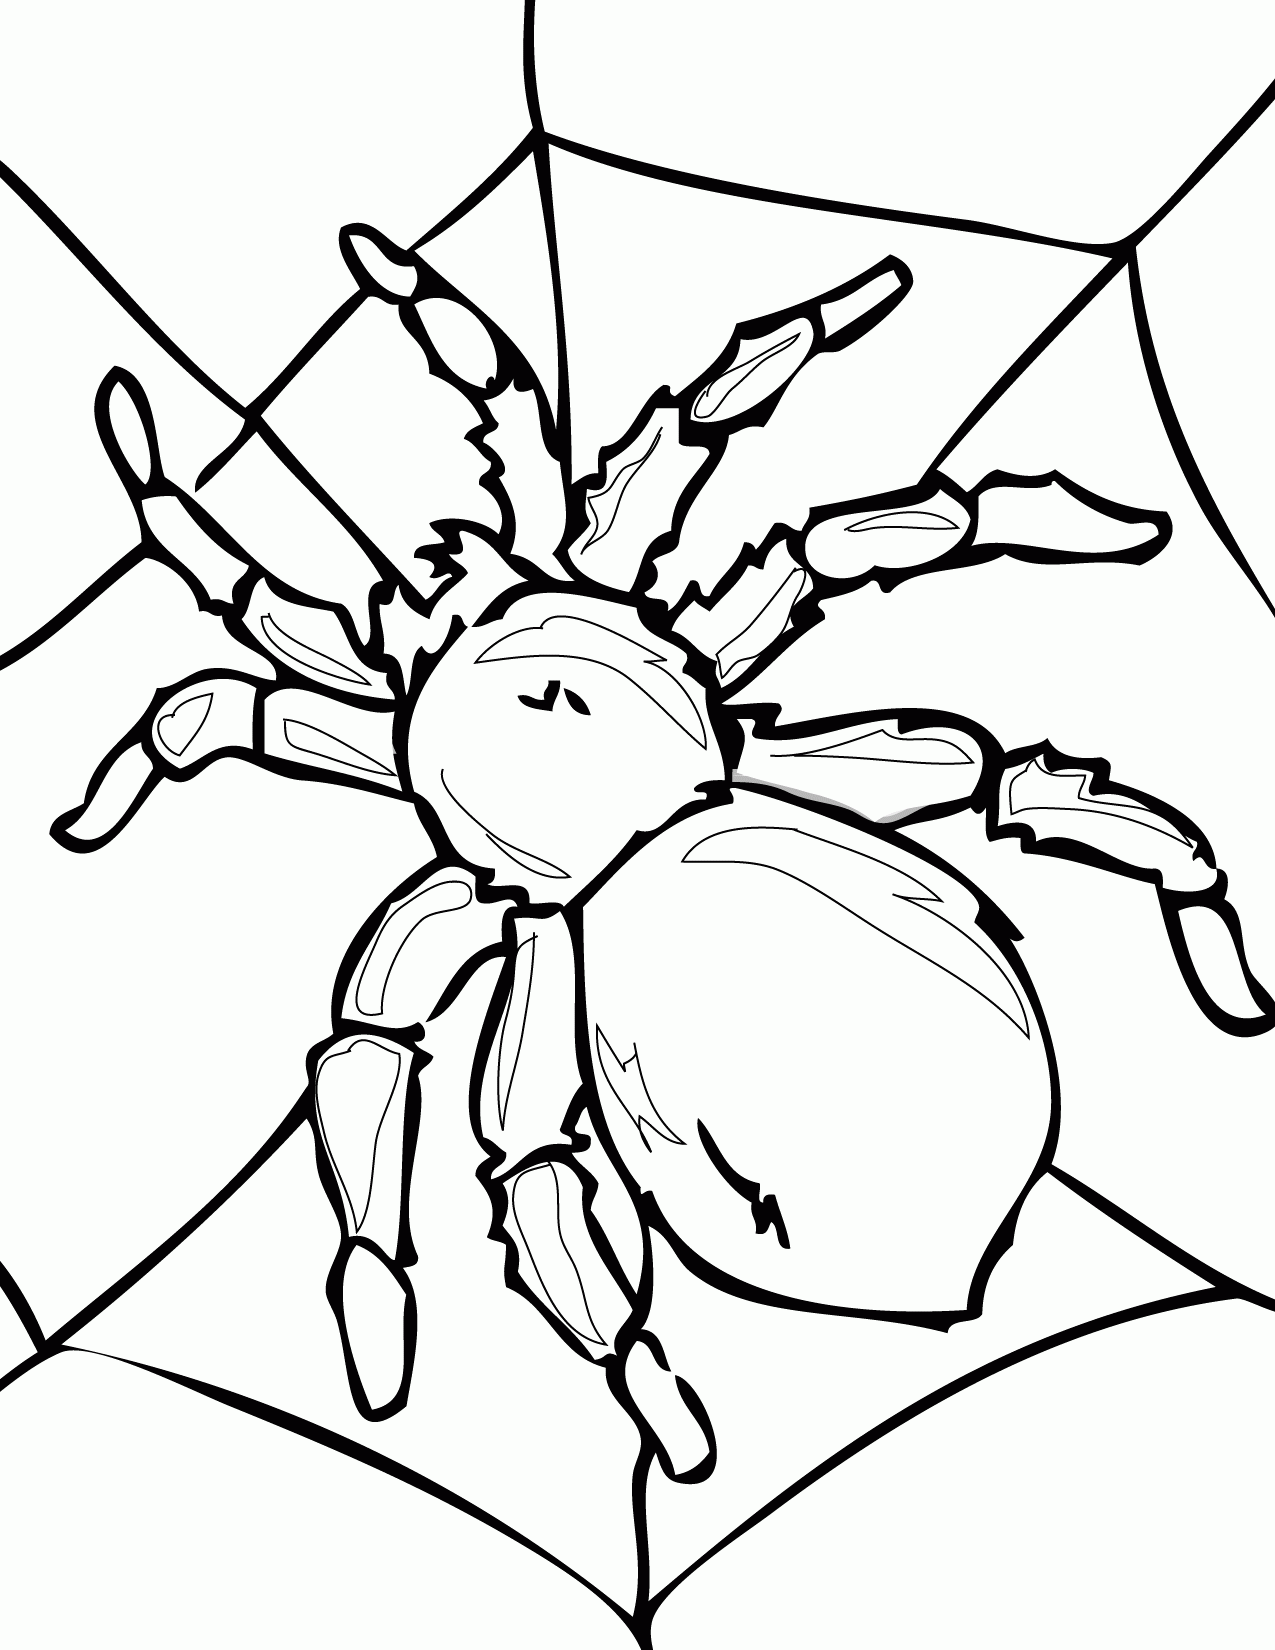 √ Iron Spider Coloring Pages / Coloring Pages 46 Fantastic Spider Man